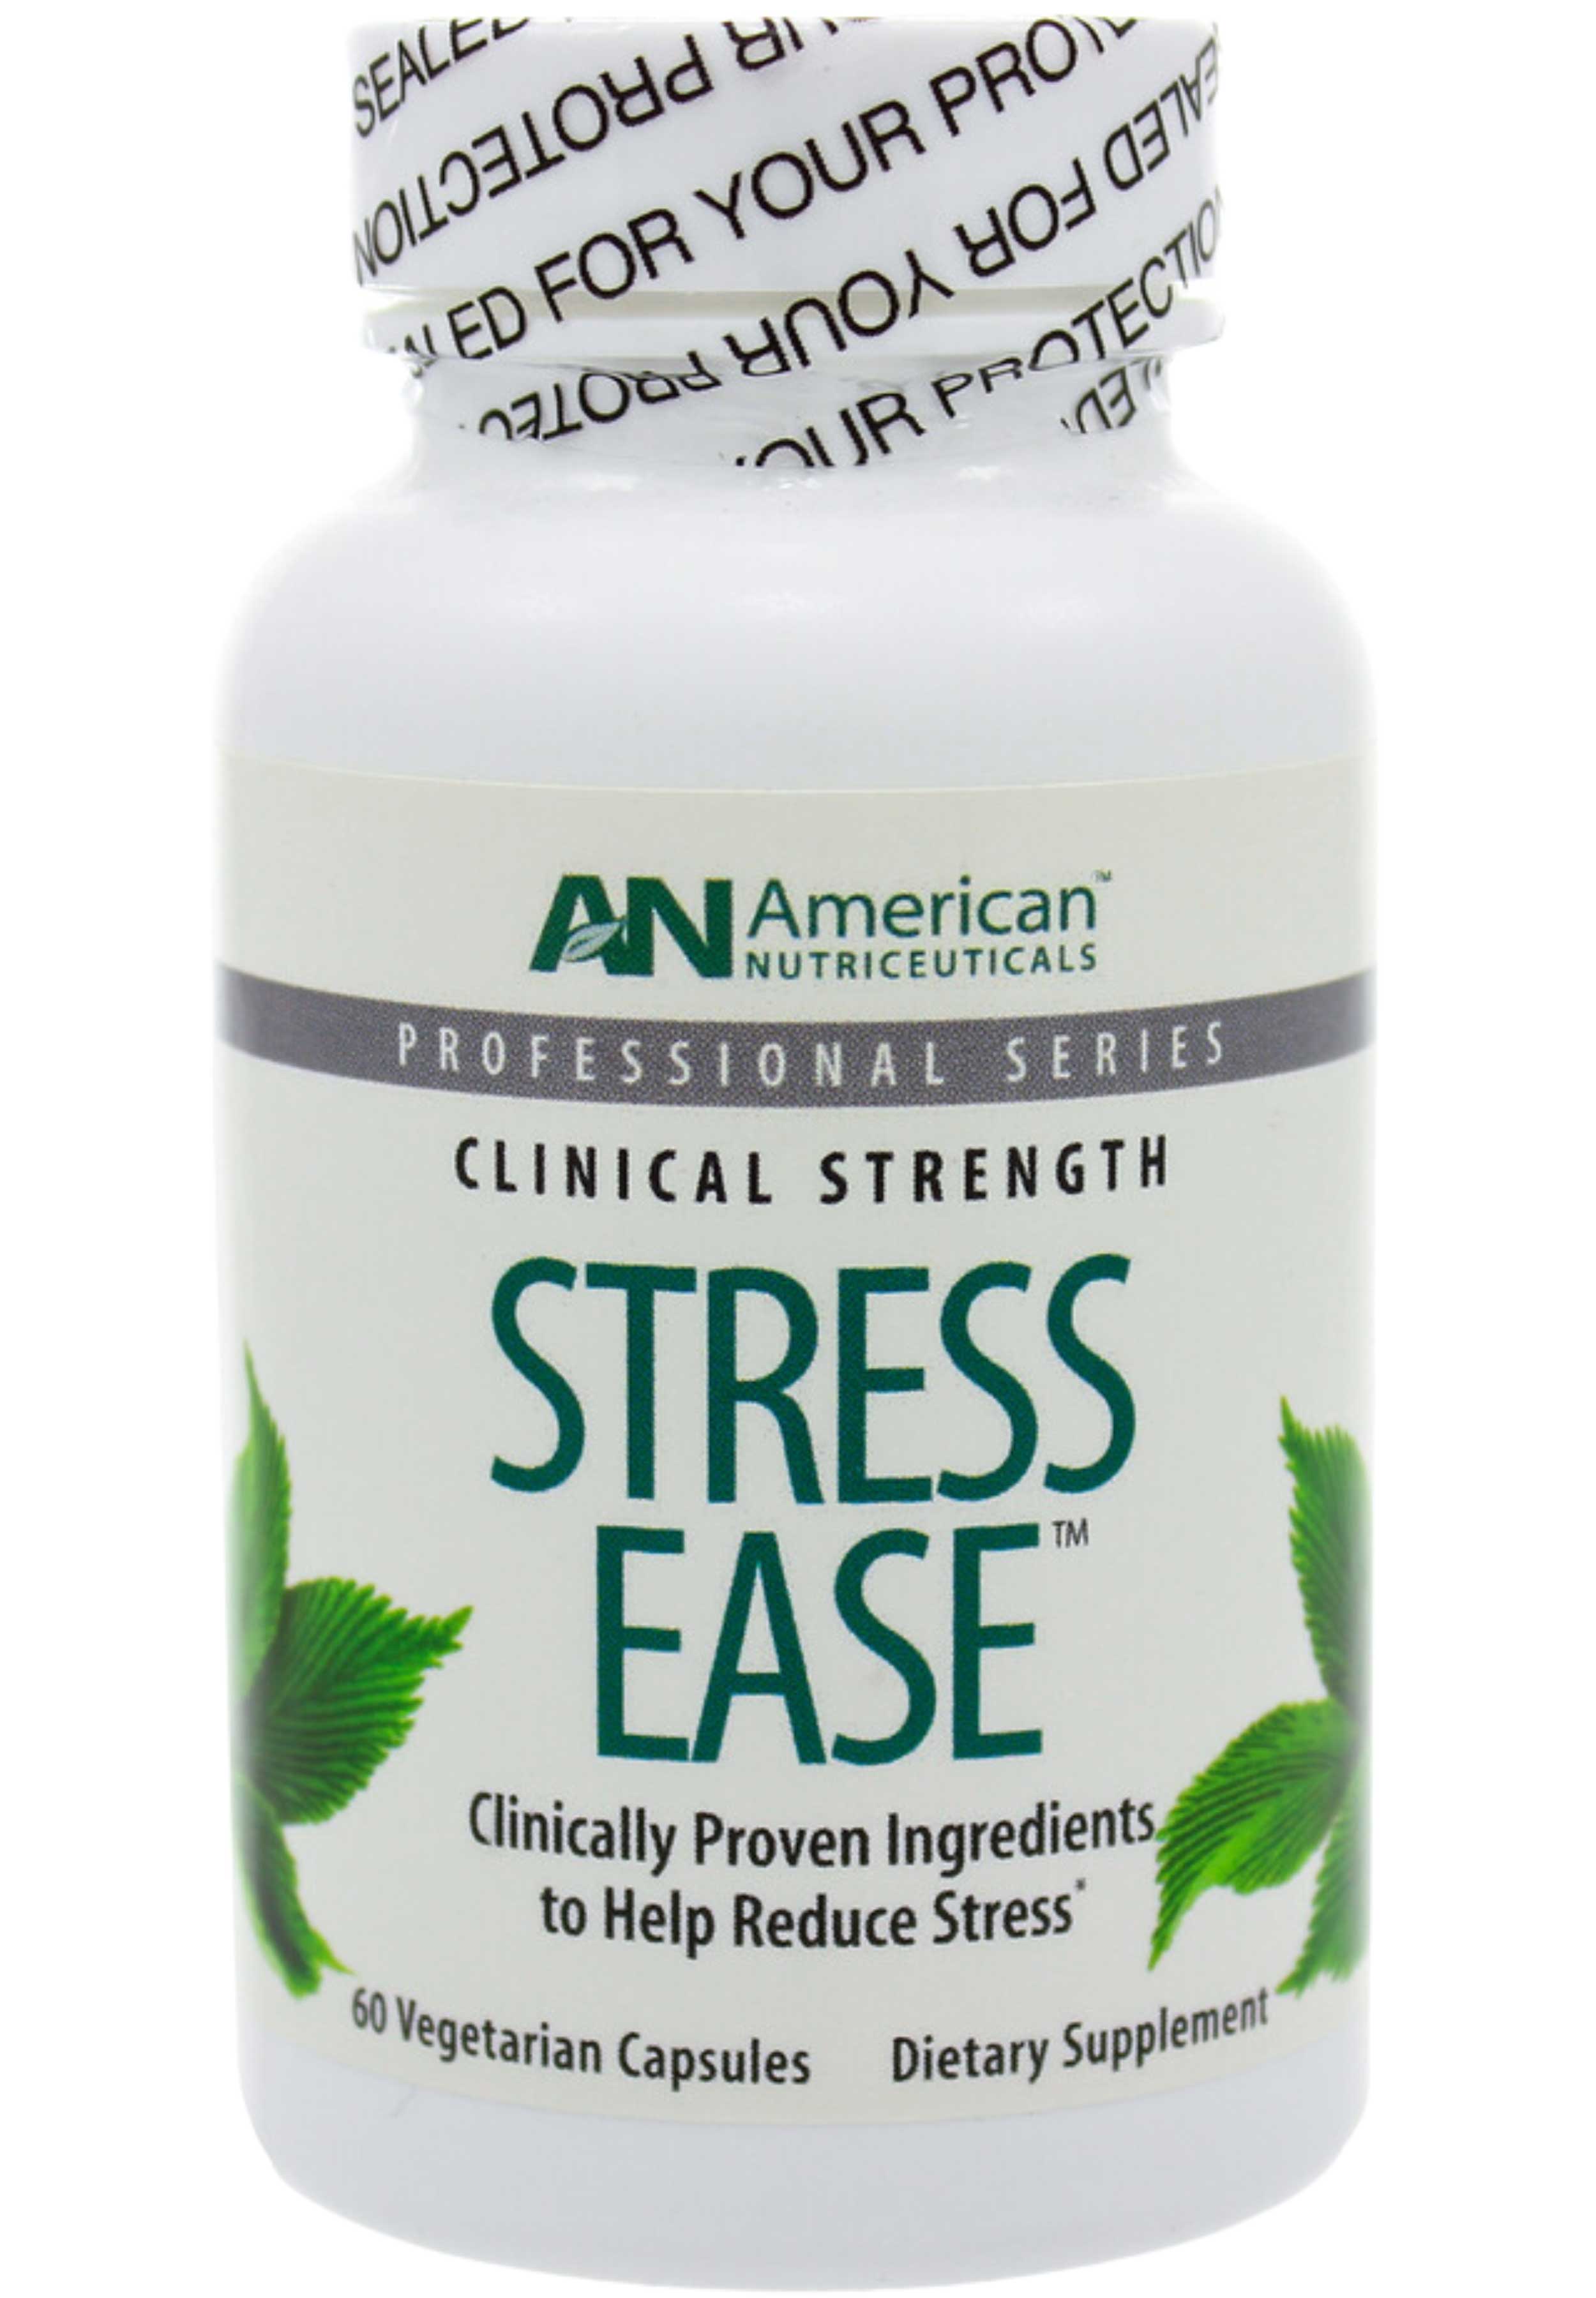 American Nutriceuticals Stress Ease